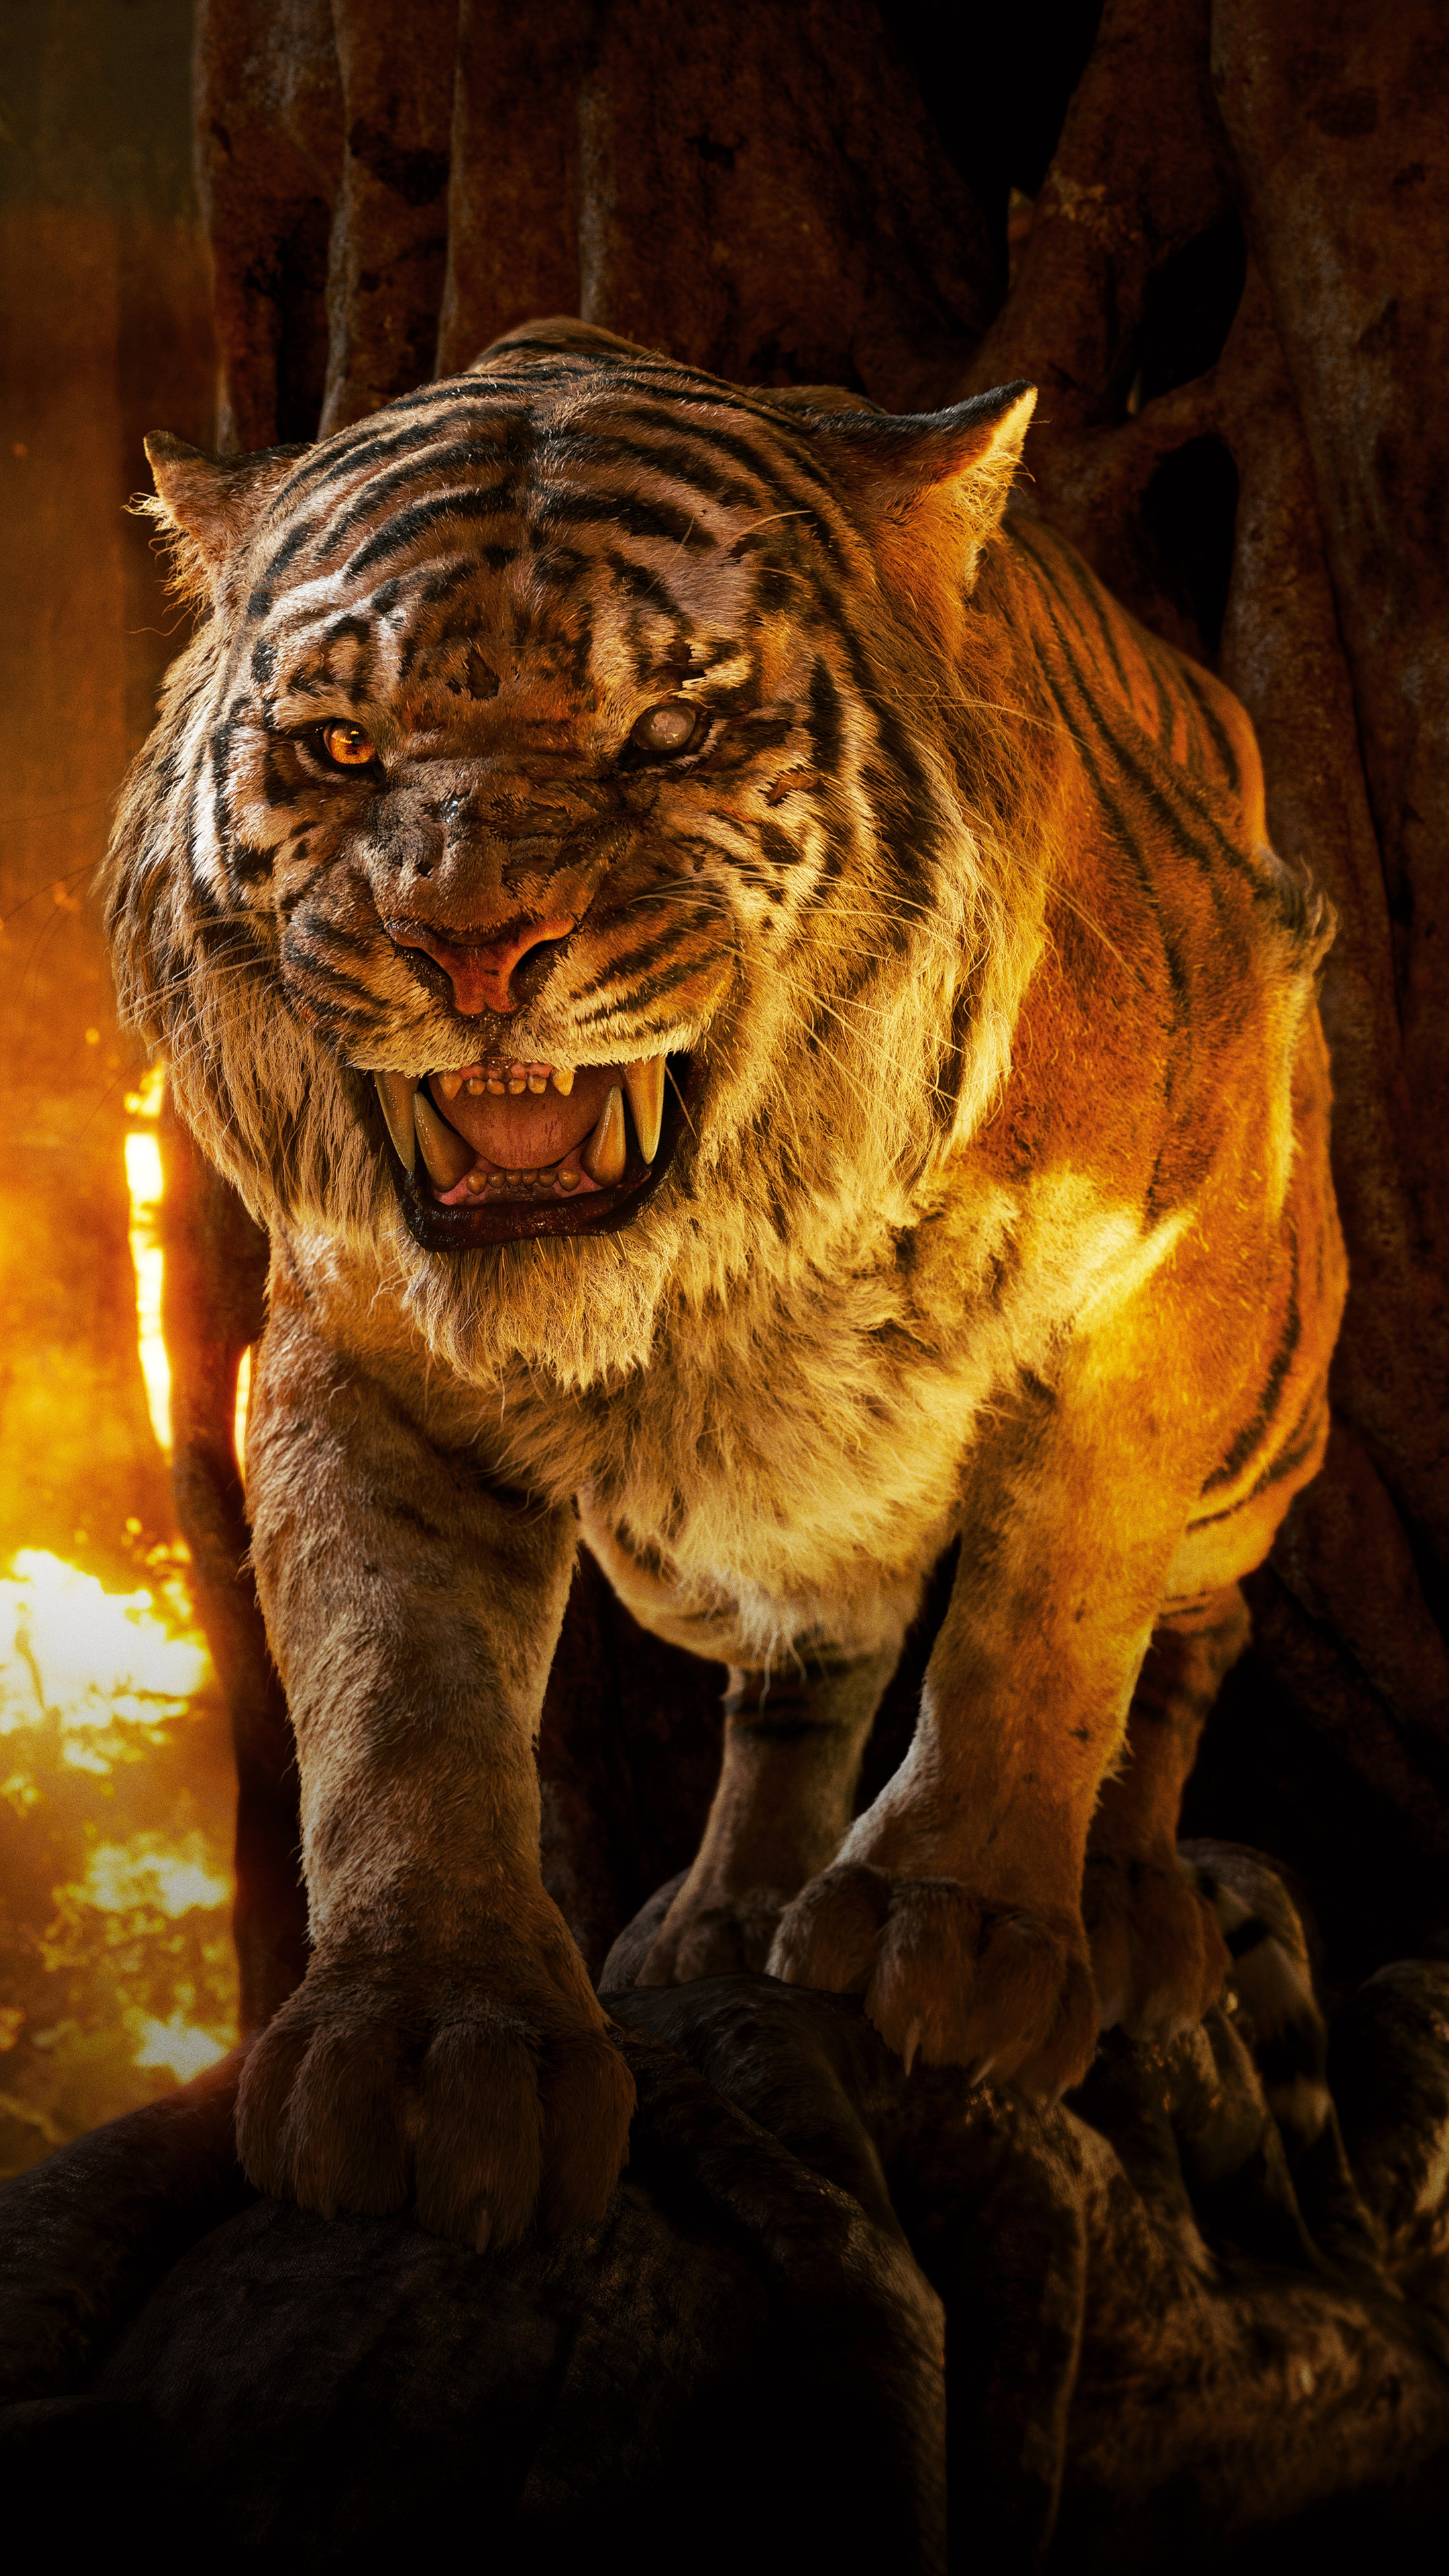 The Jungle Book (Movie), Tiger in action, Sony Xperia X XZ Z5 Premium HD 4K wallpapers, Striking visuals, 2160x3840 4K Handy